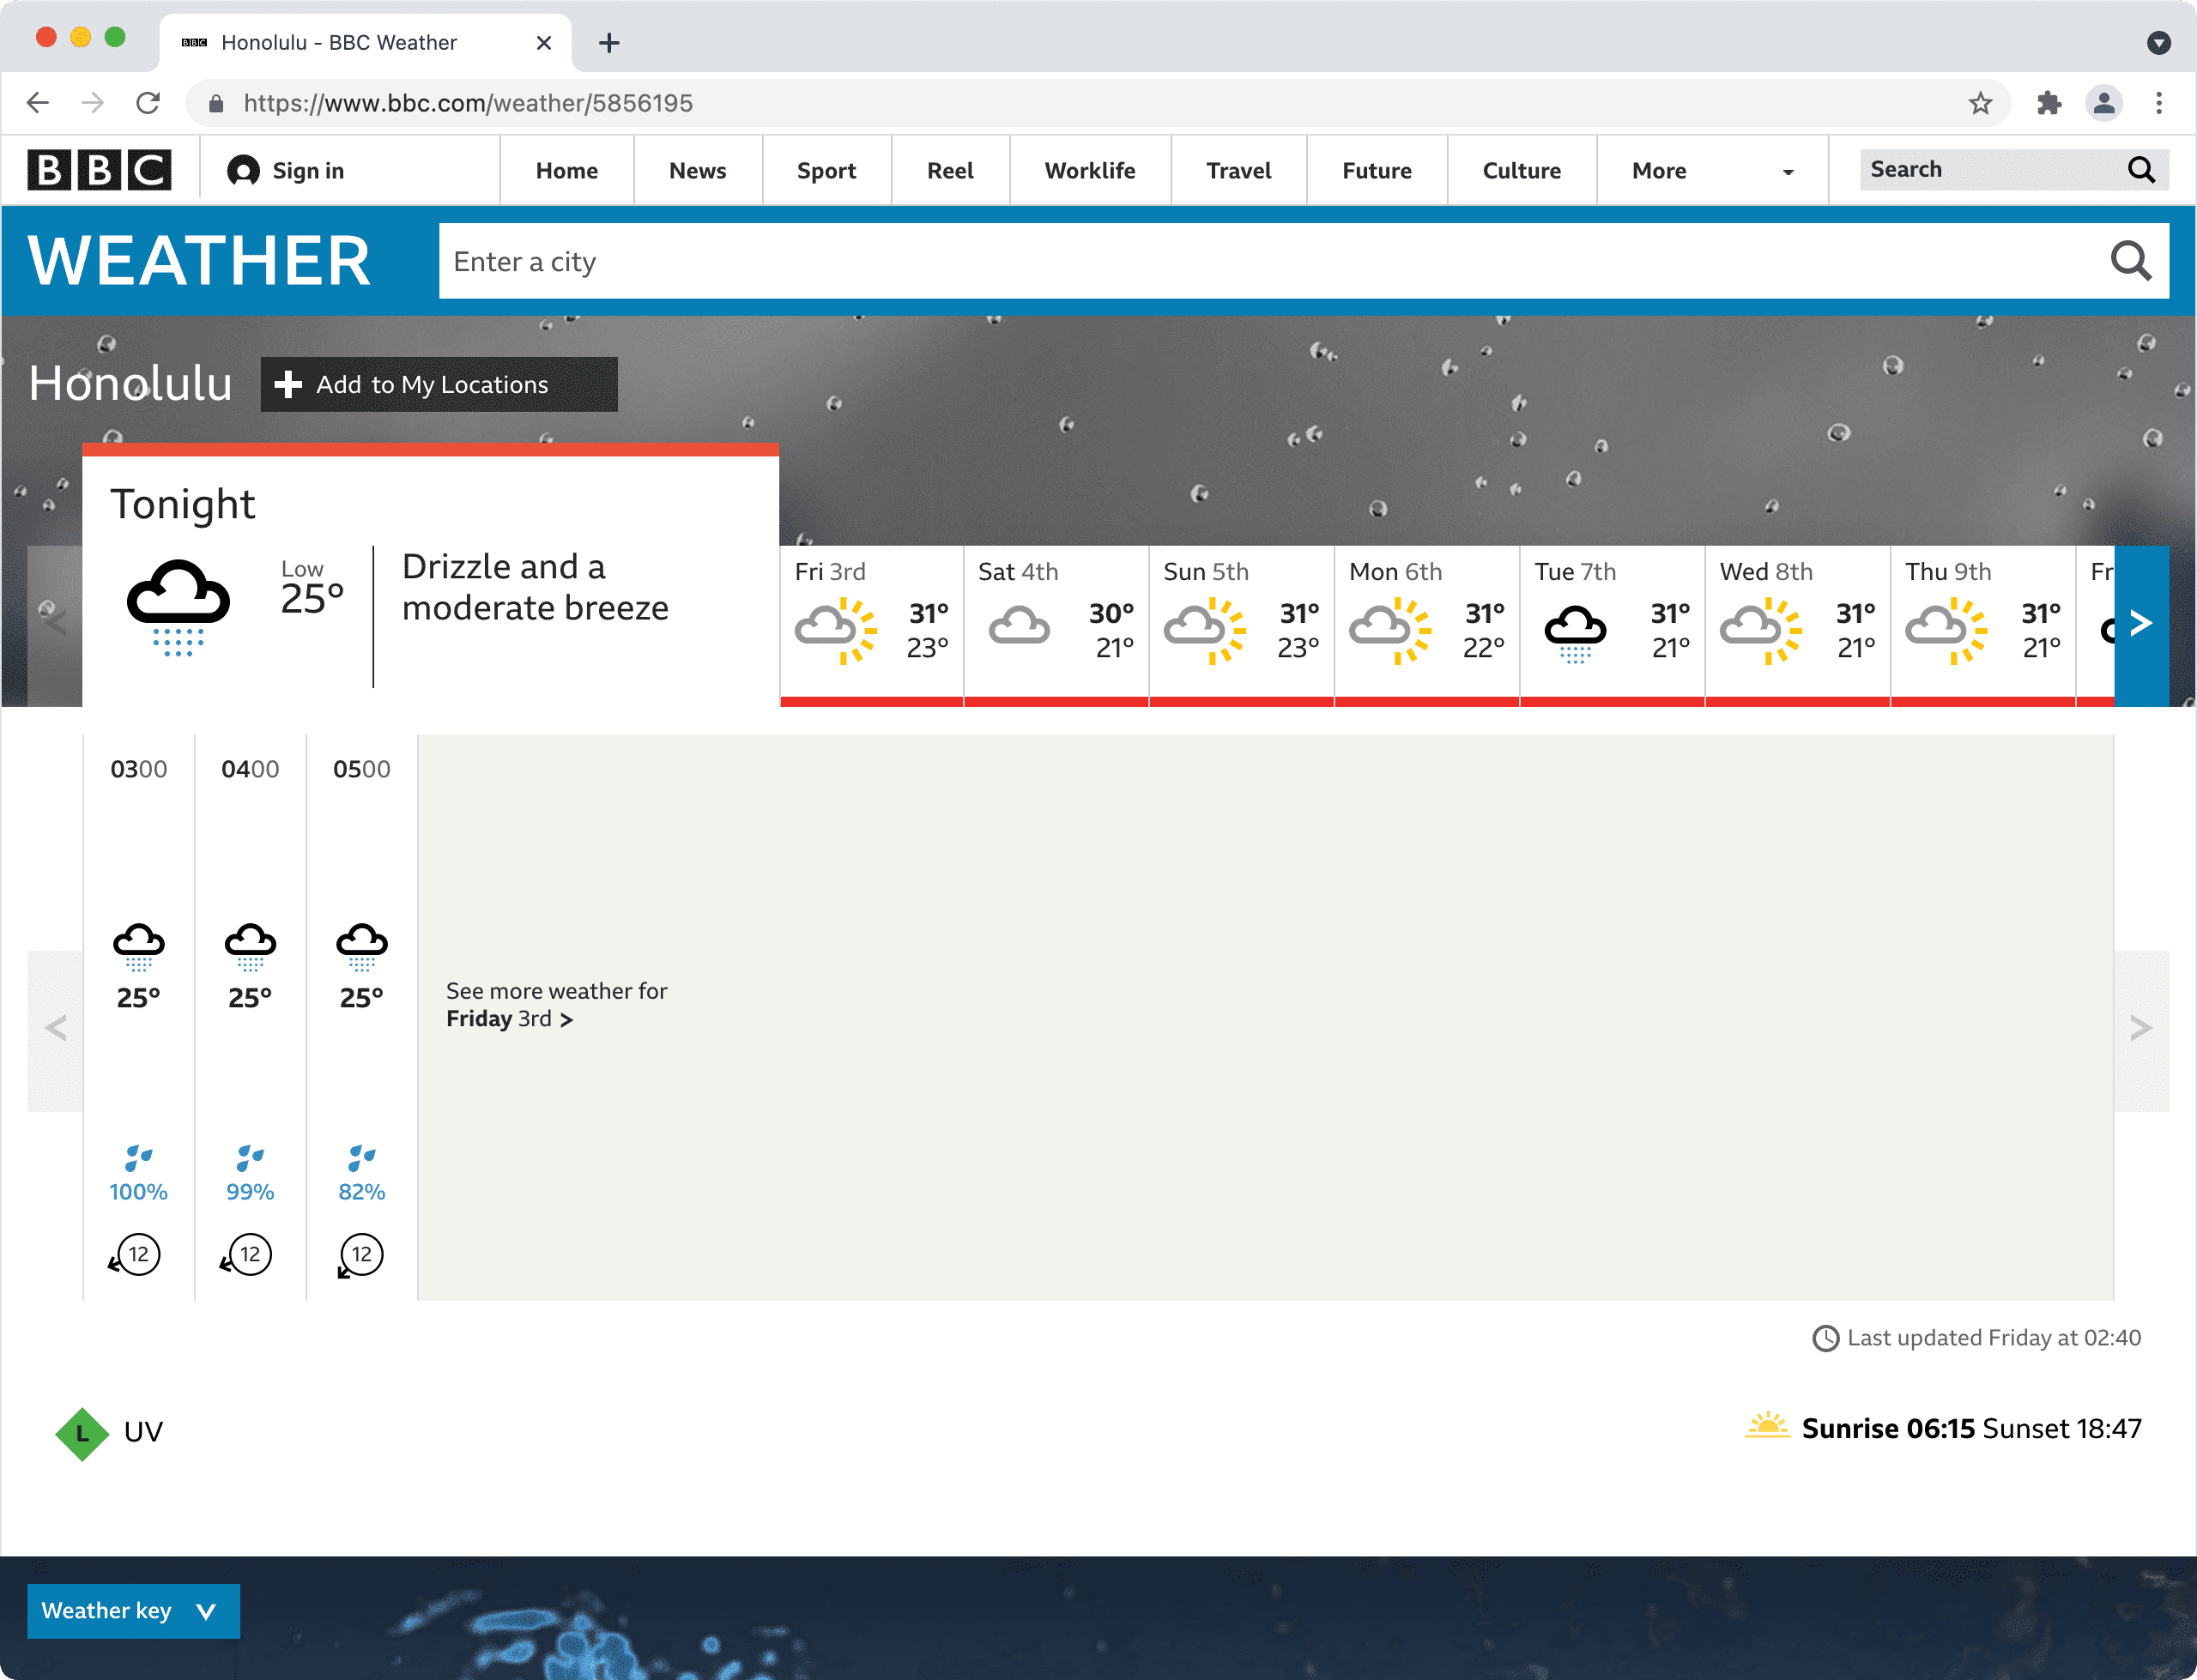 BBC Weather displaying a location with current time between midnight and 5 AM